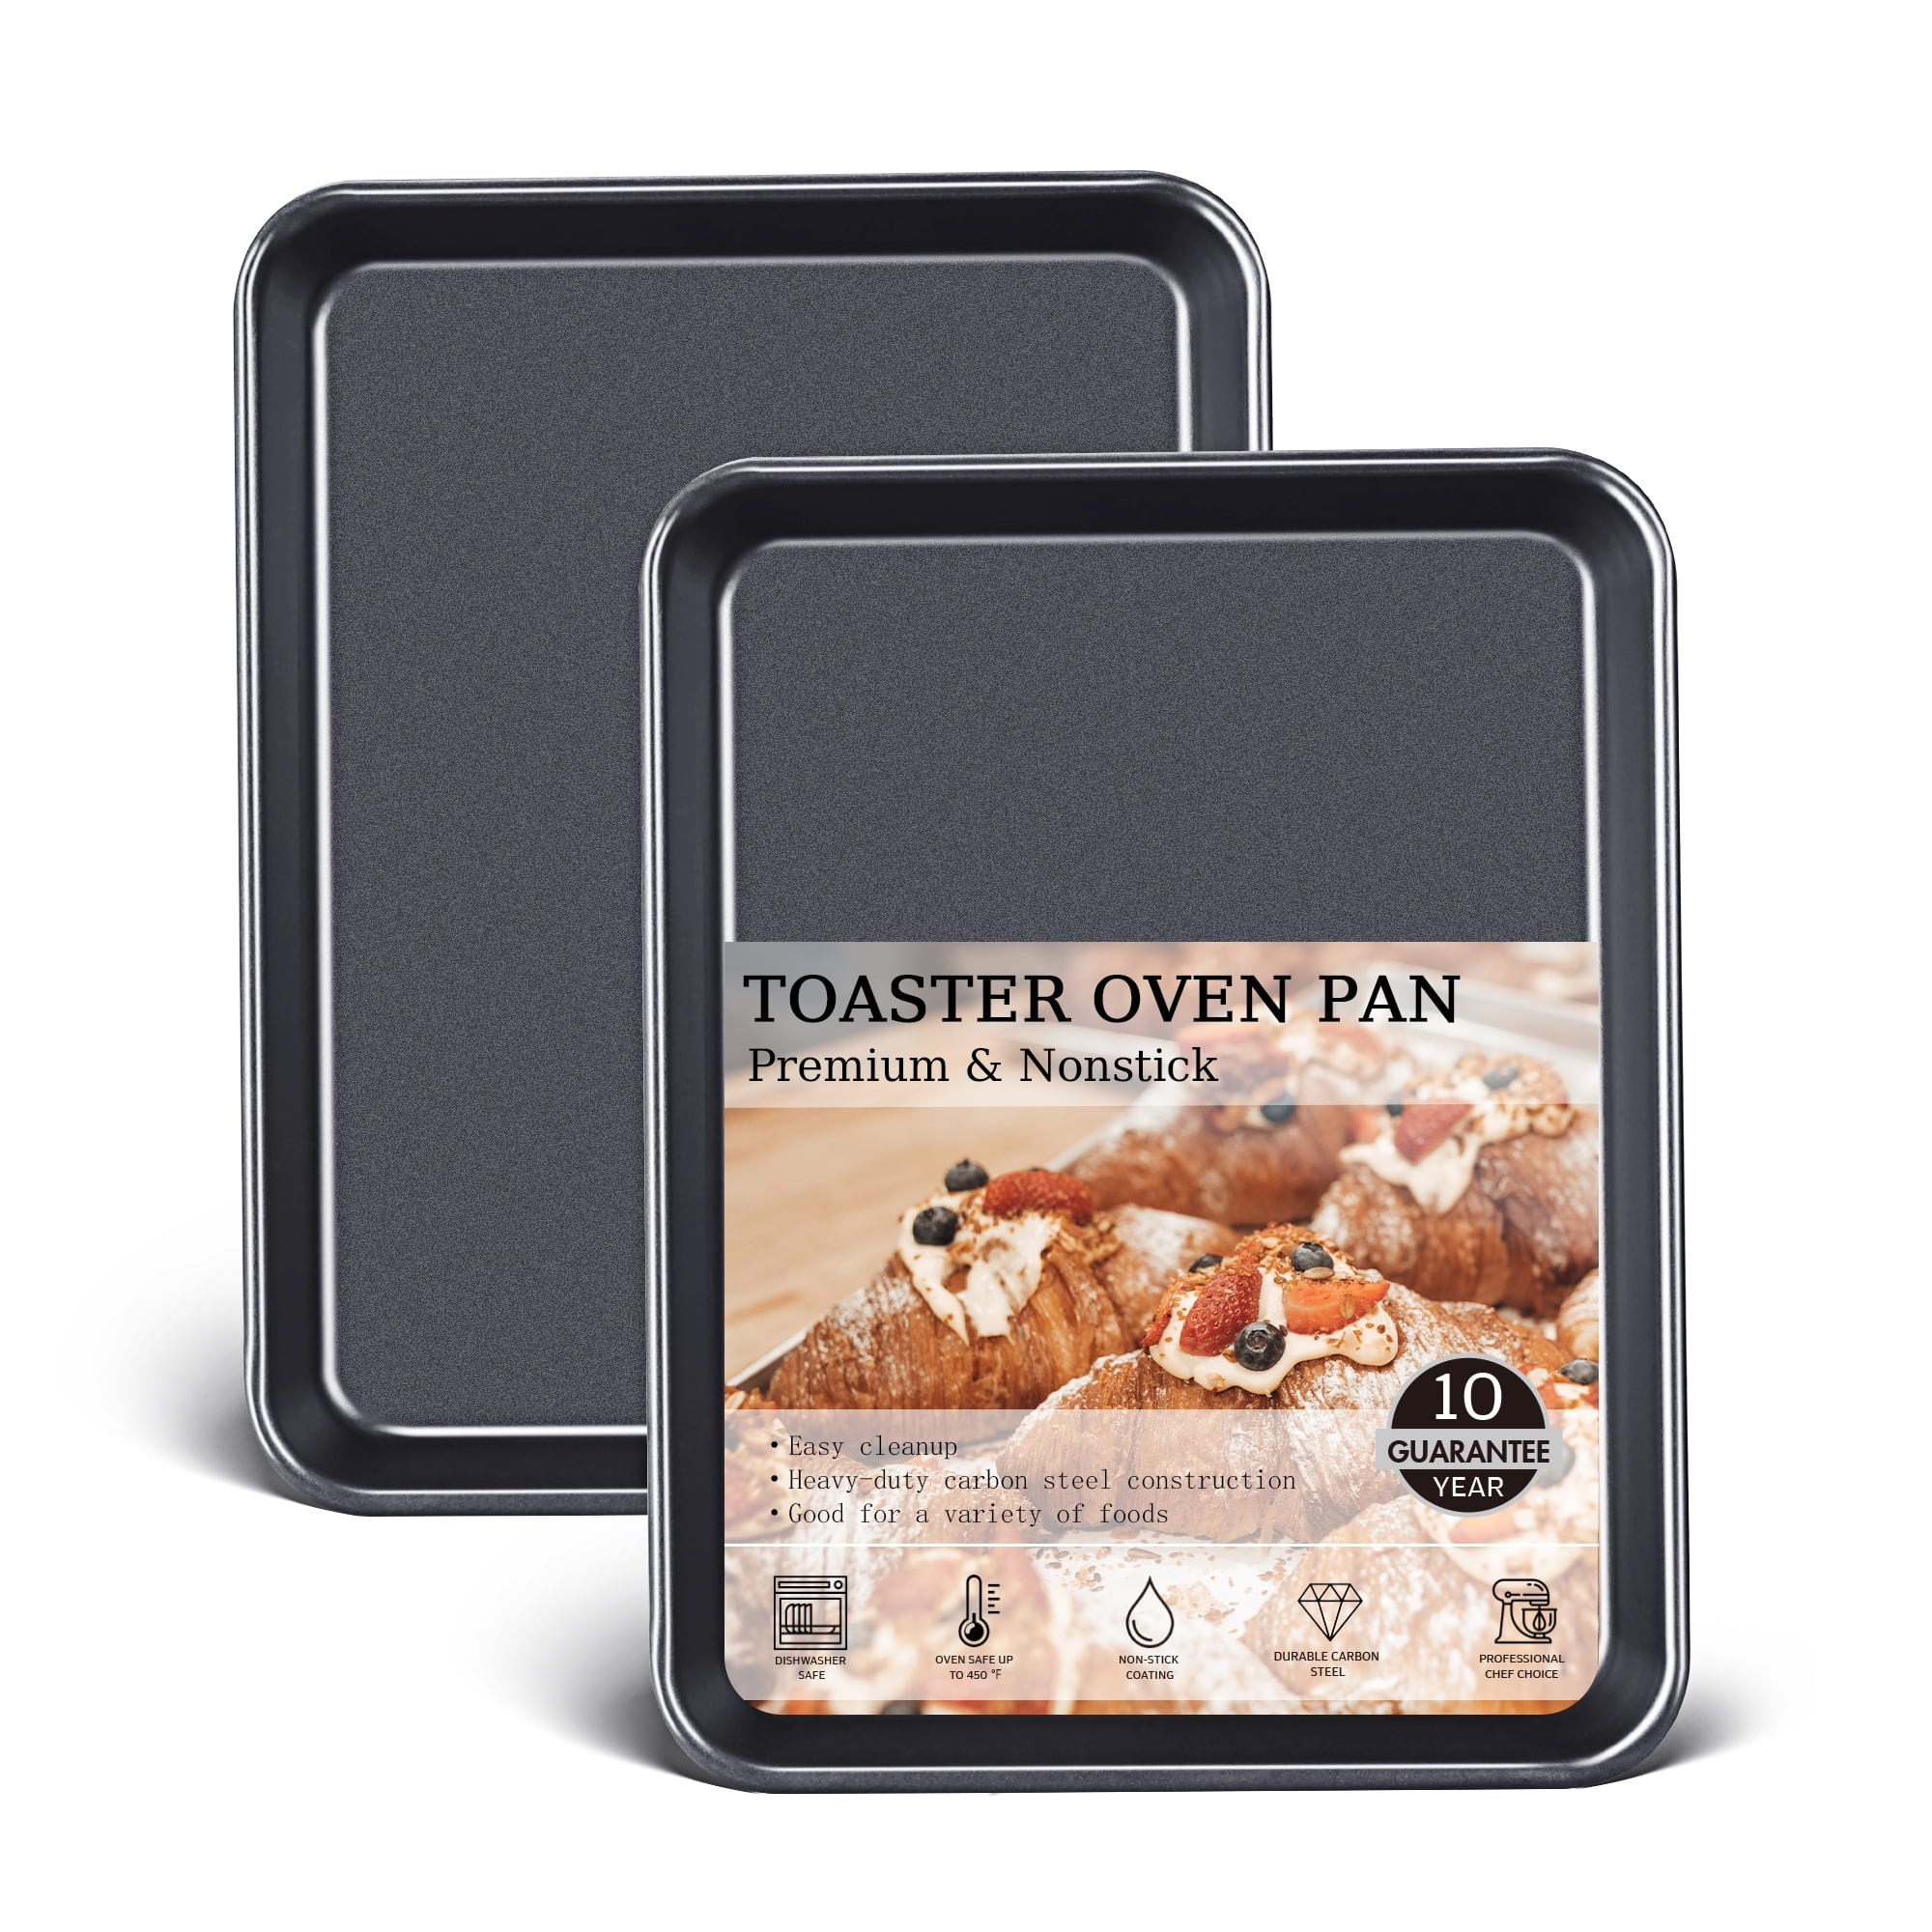 HONGBAKE Toaster Oven Pans for Baking 2 Pack, Nonstick 1/8 Cookie